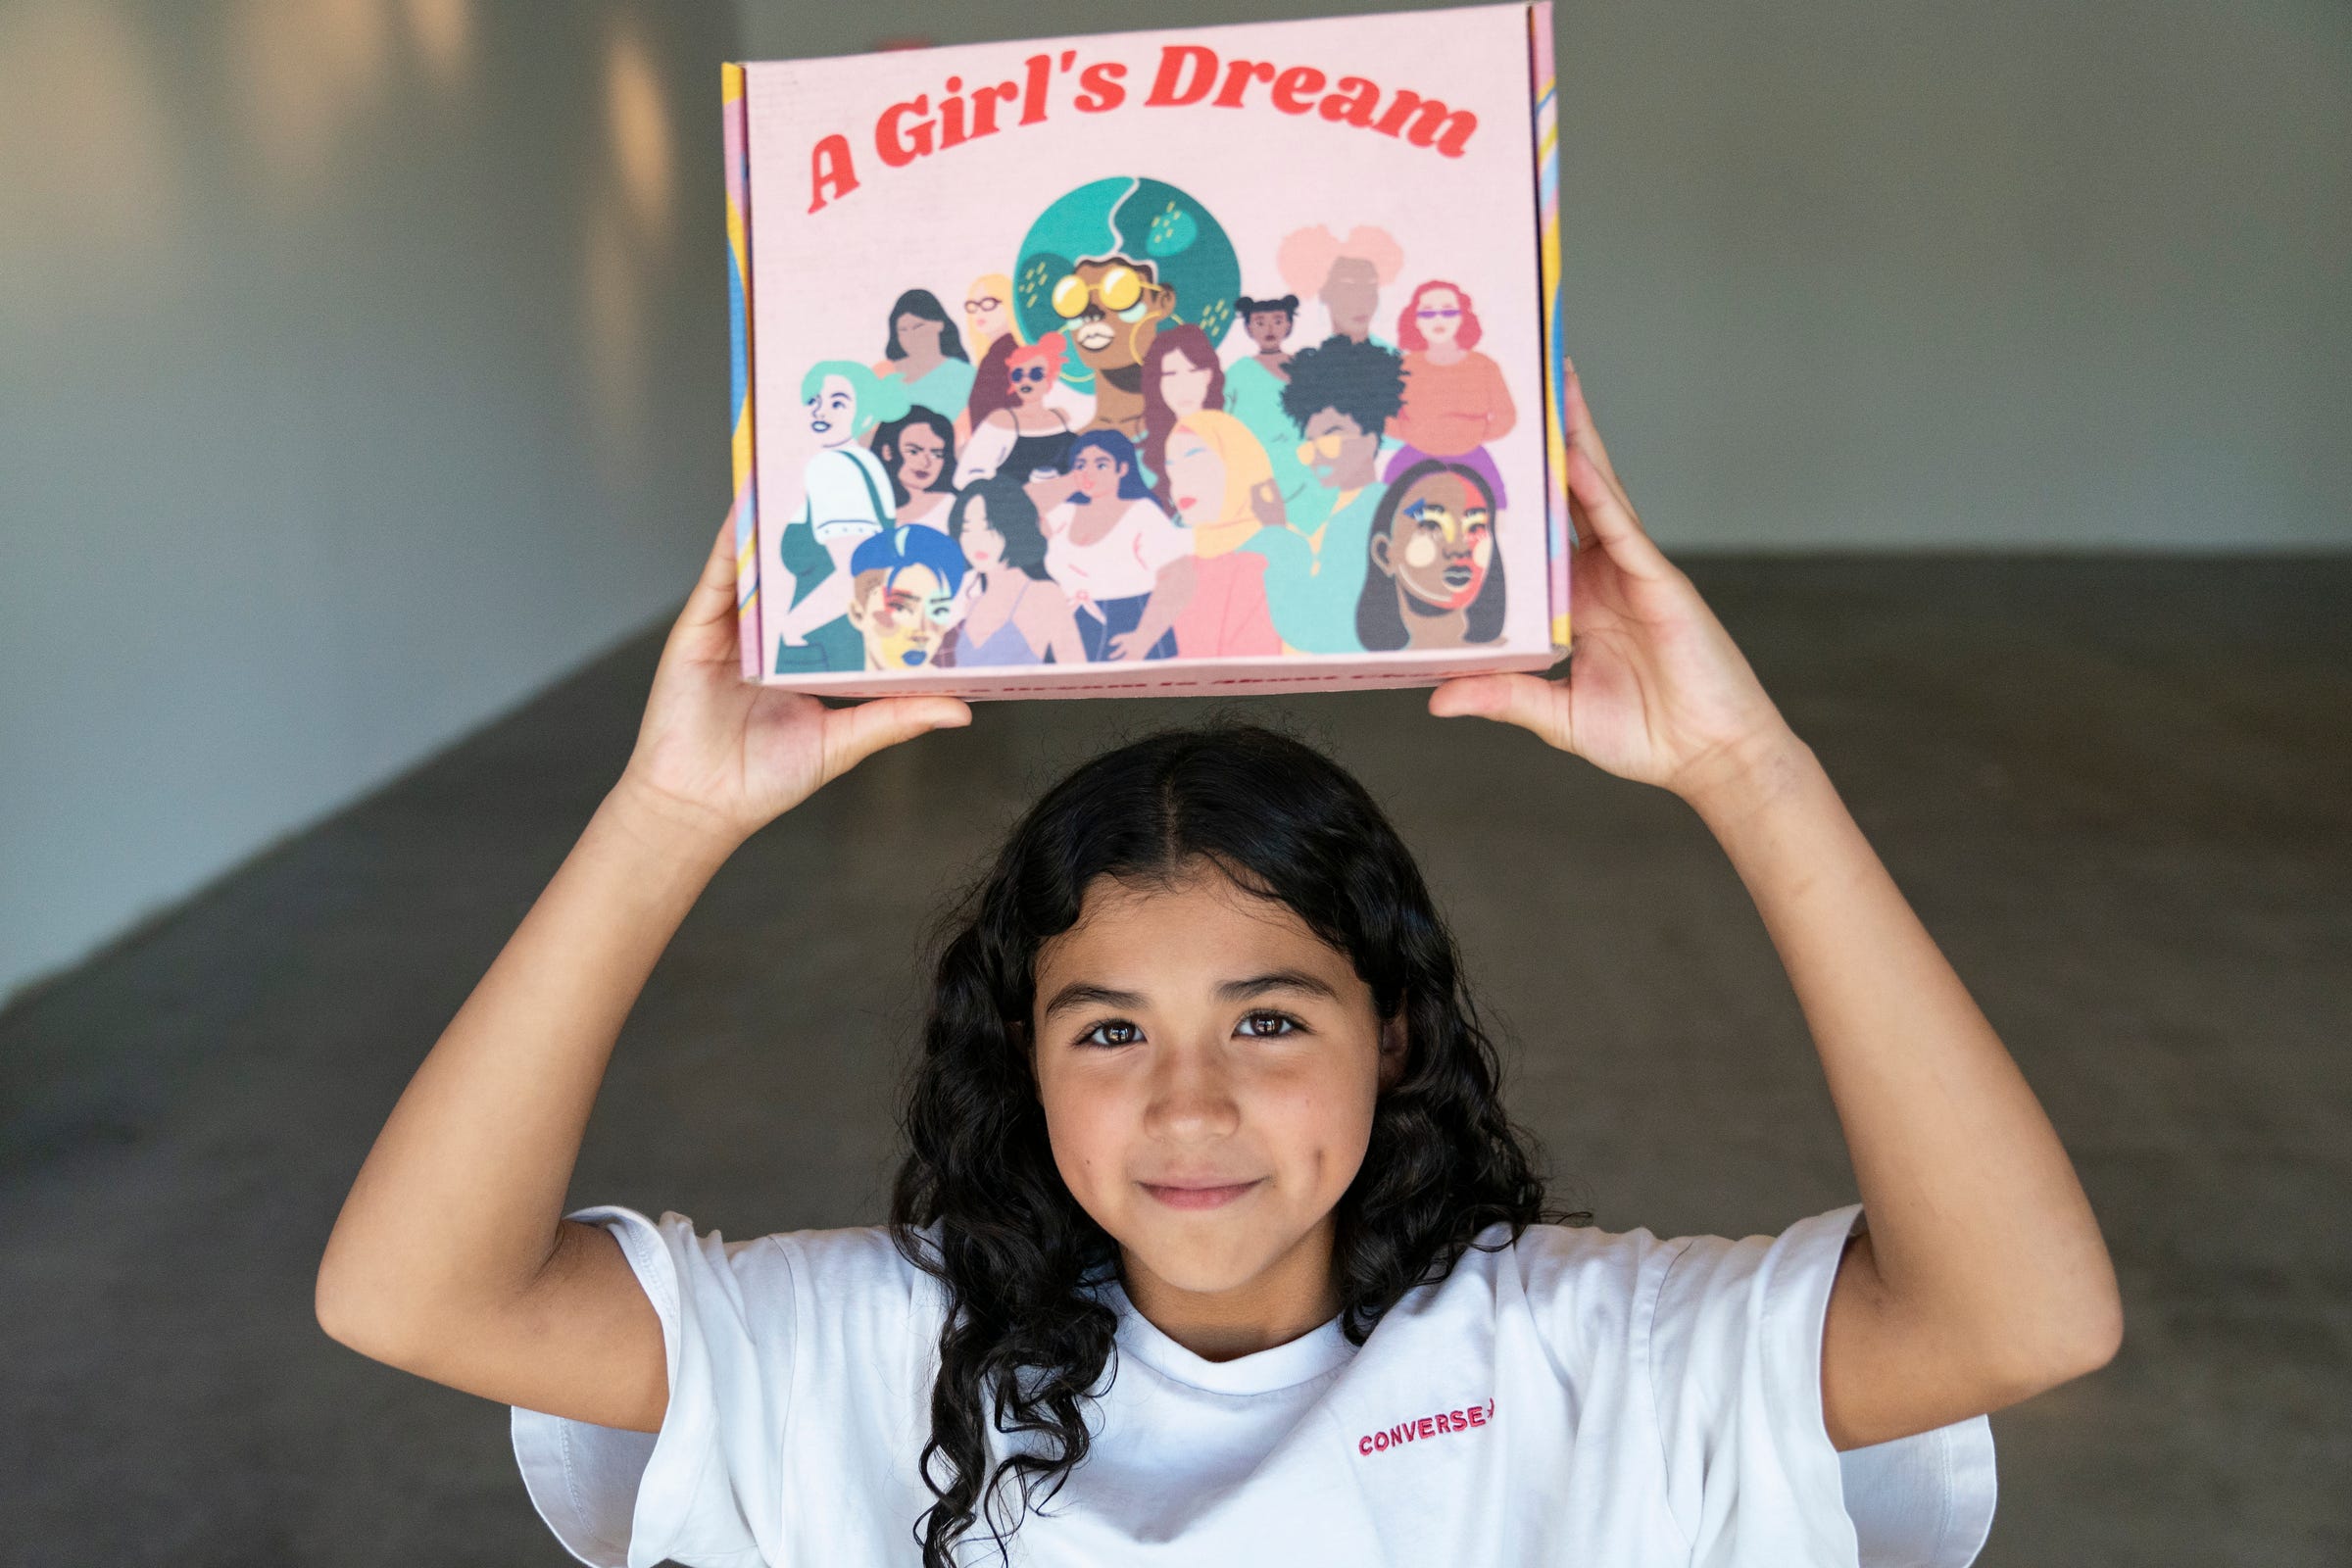 Lily Rodriguez, 11, hoists up a A Girl's Dream STEAM kit she received a few weeks prior at the Mexicantown Community Development Corporation in Detroit Wednesday, Aug. 10, 2022. A Girl's Dream have created an after school and weekend program with the goal of engaging young women of color in STEAM (Science, Technology, Engineering, Arts and Math) fields. The group has made kits that include a variety of project-oriented activities including paints and chia seeds etc.